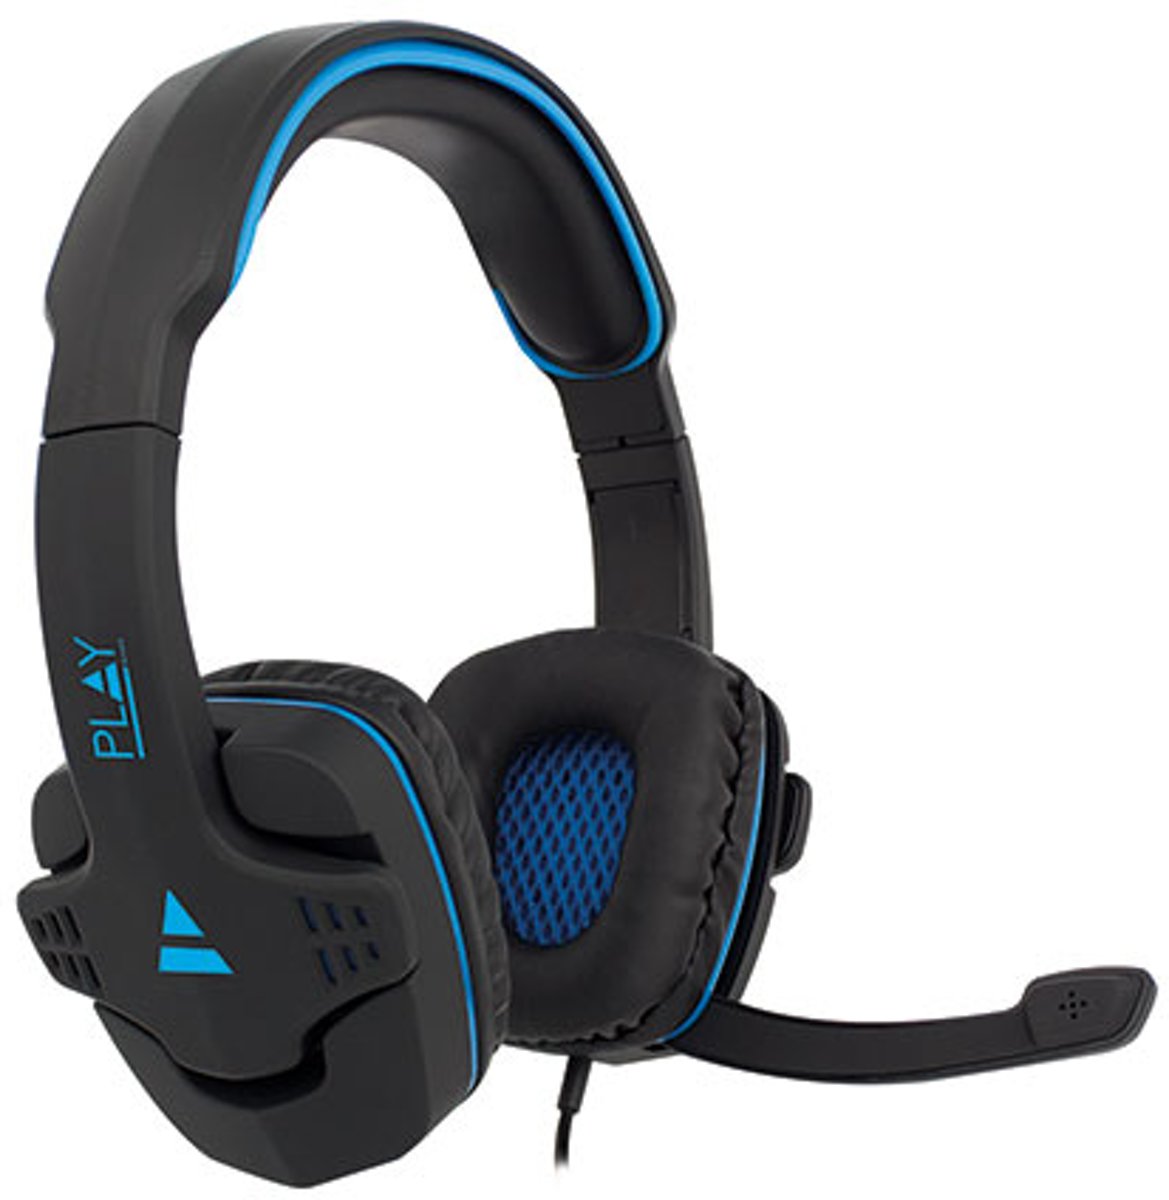 Ewent PL3320 Play Gaming Headset with microphon